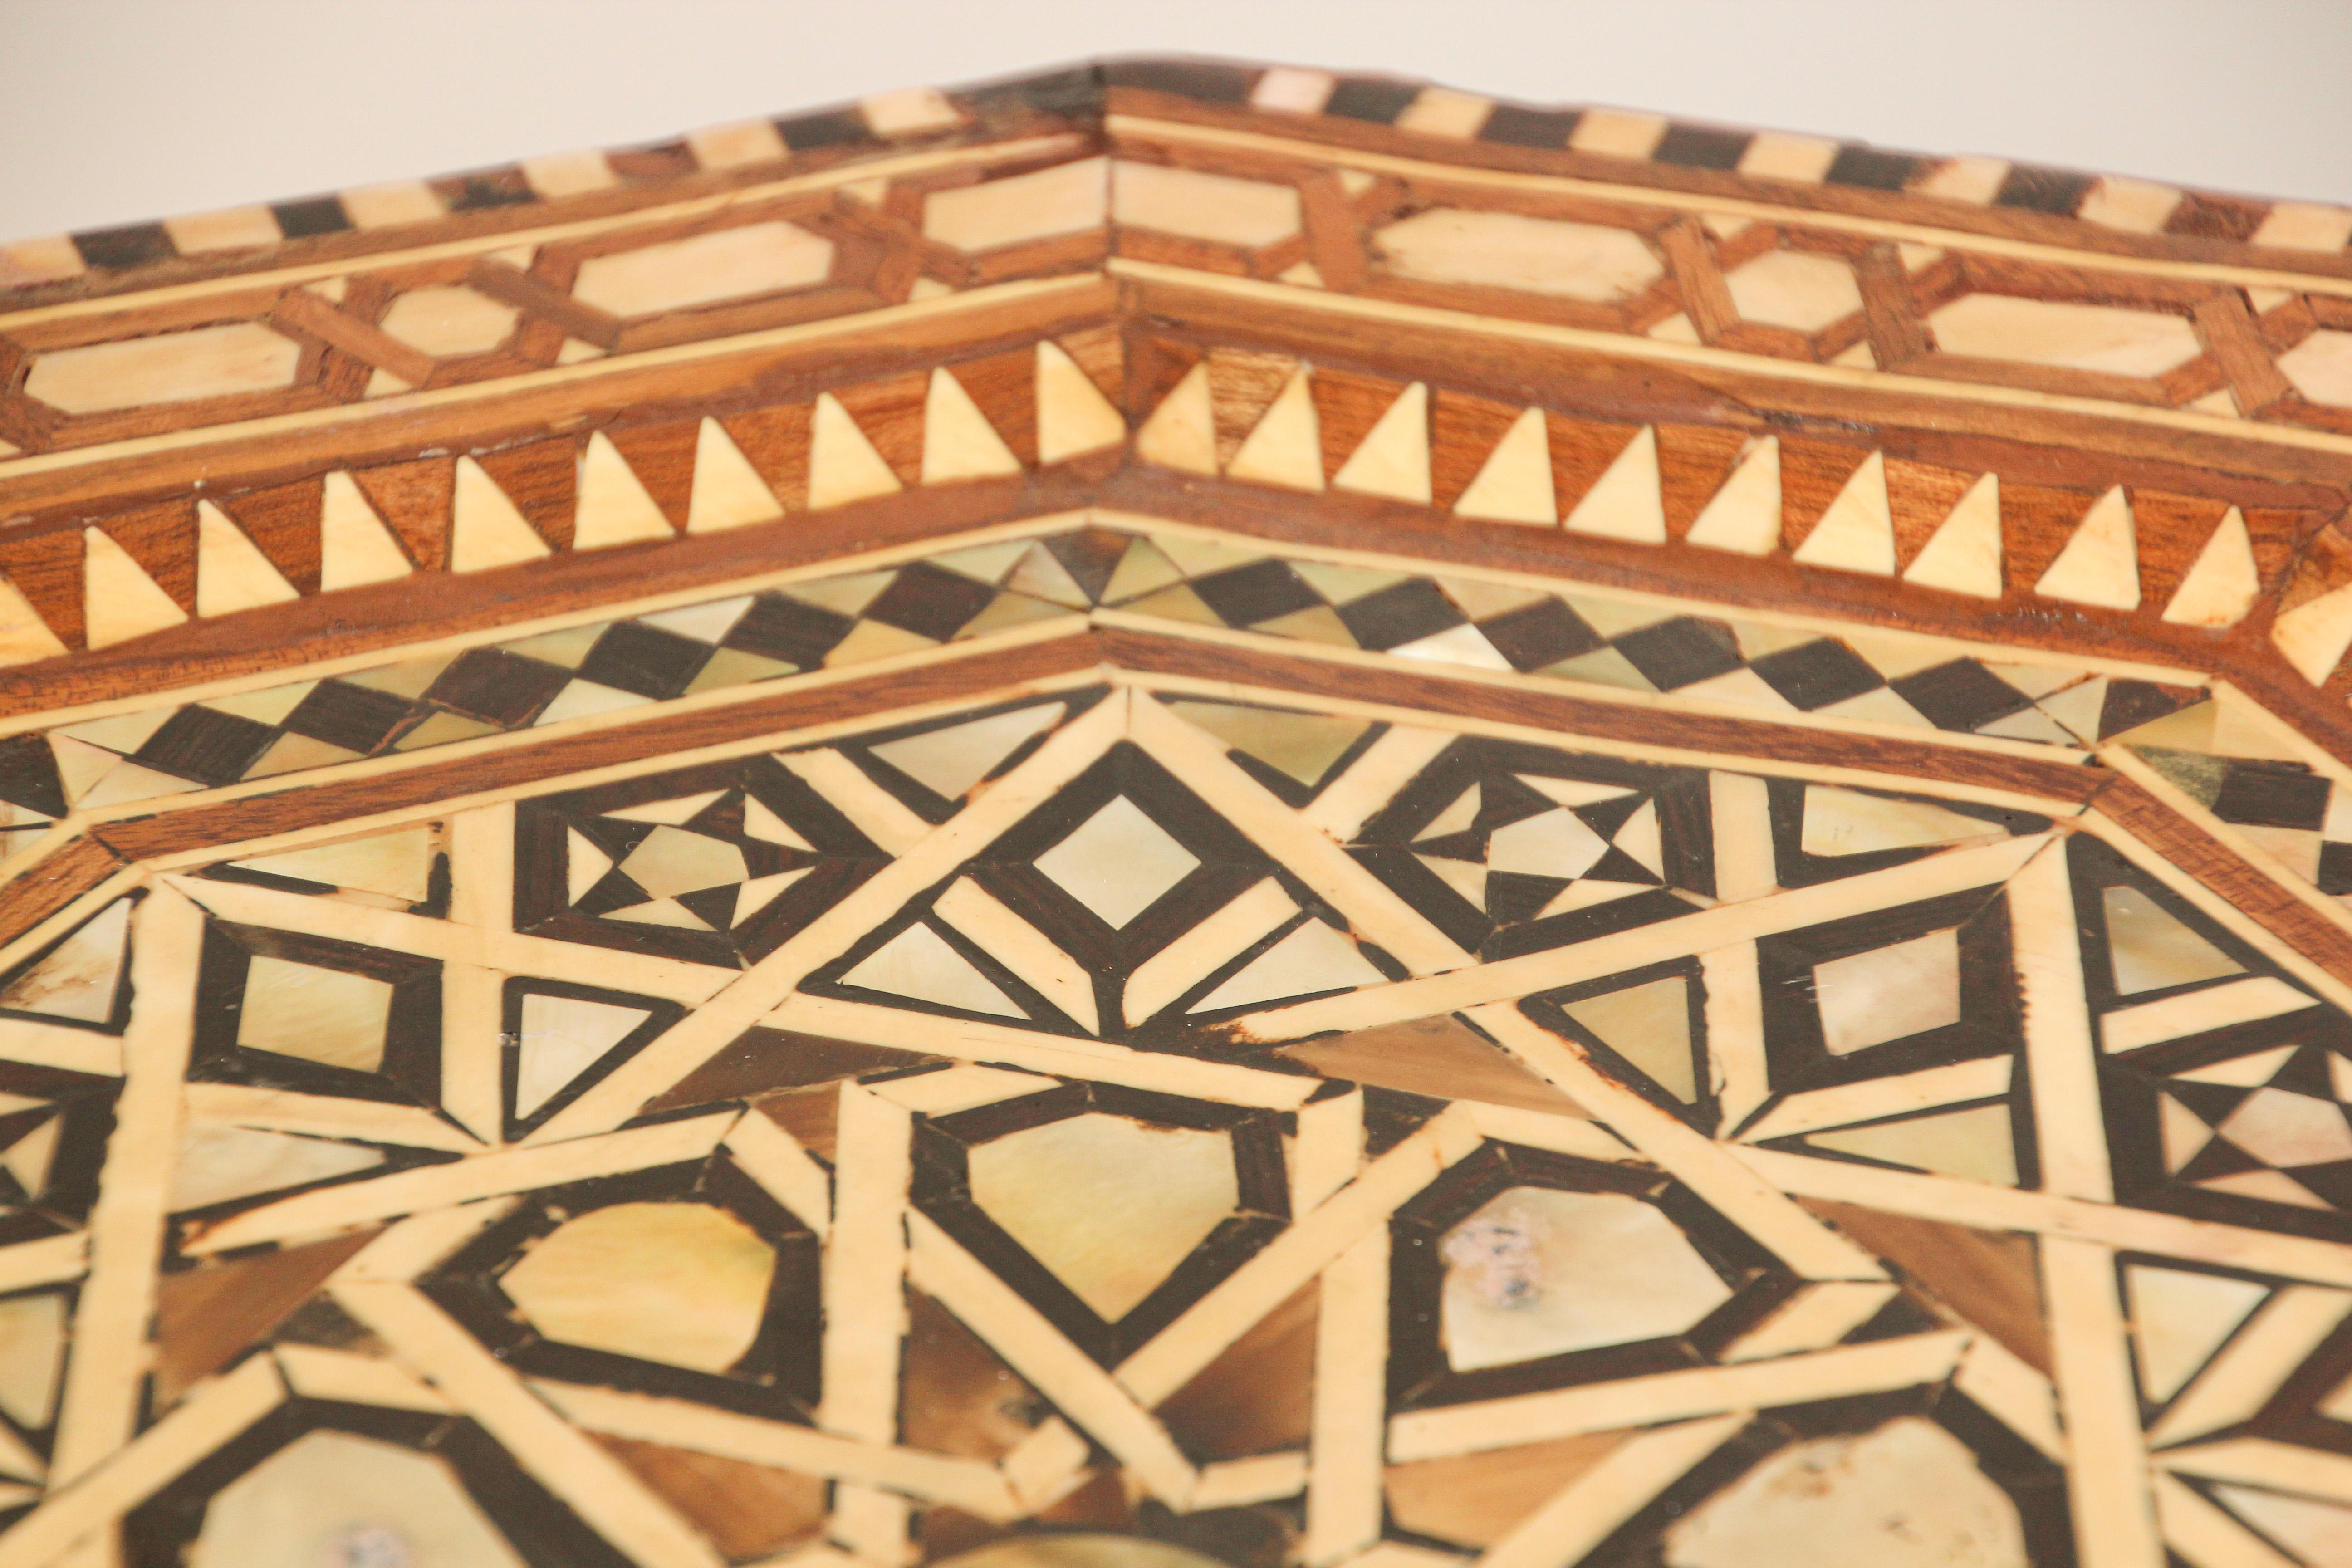 Lebanese Middle East Syrian Octagonal Tables Inlaid